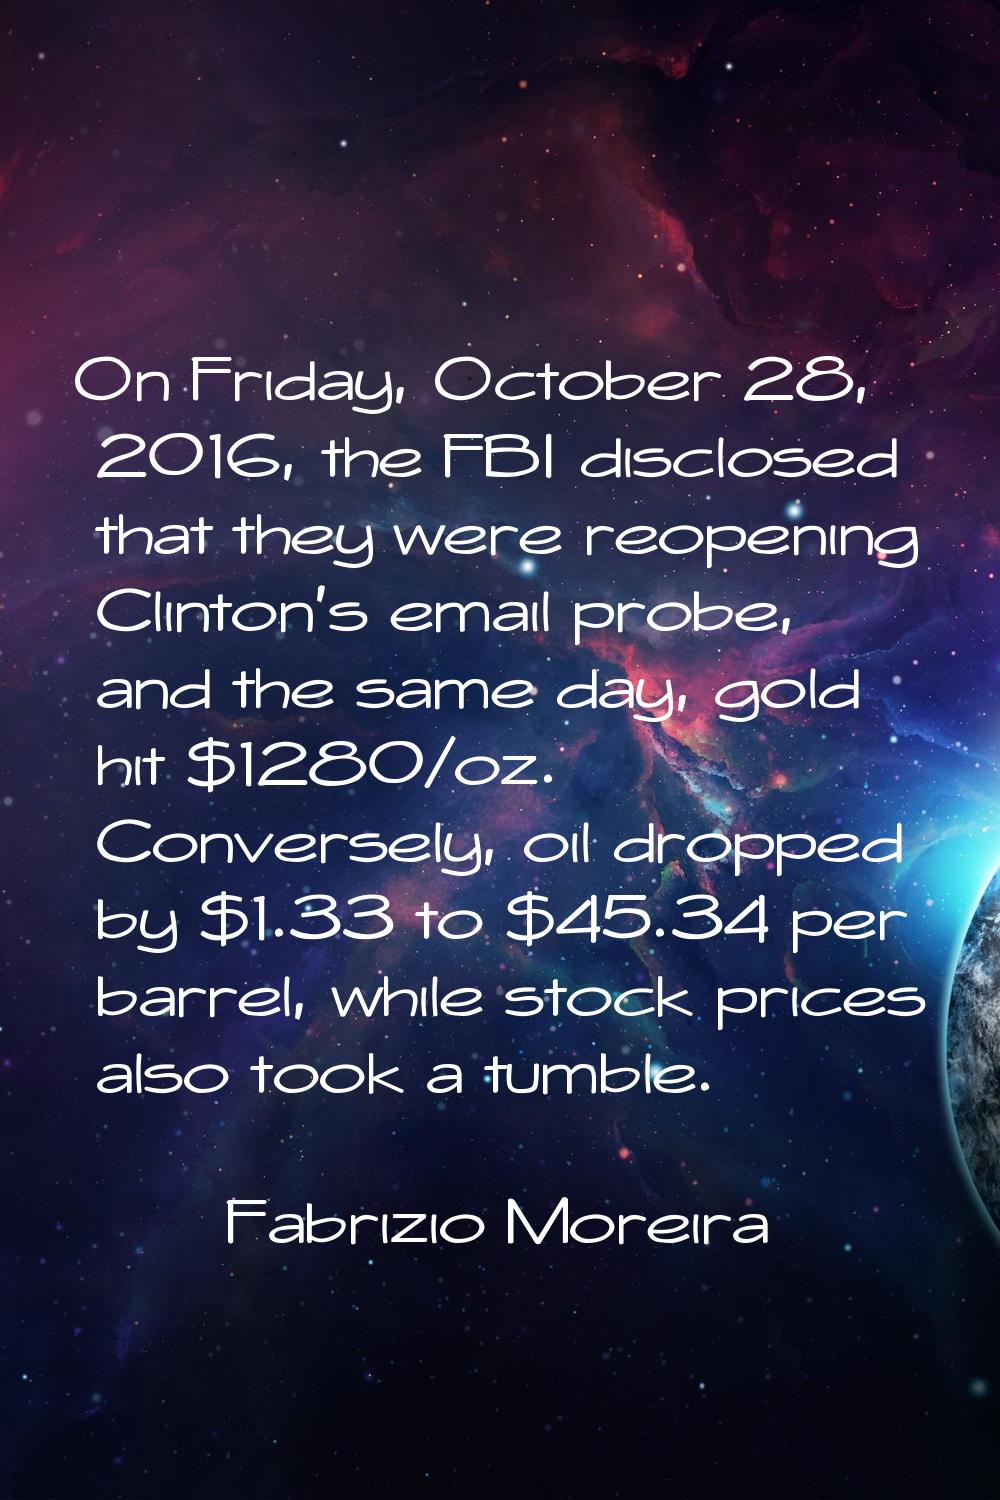 On Friday, October 28, 2016, the FBI disclosed that they were reopening Clinton's email probe, and 